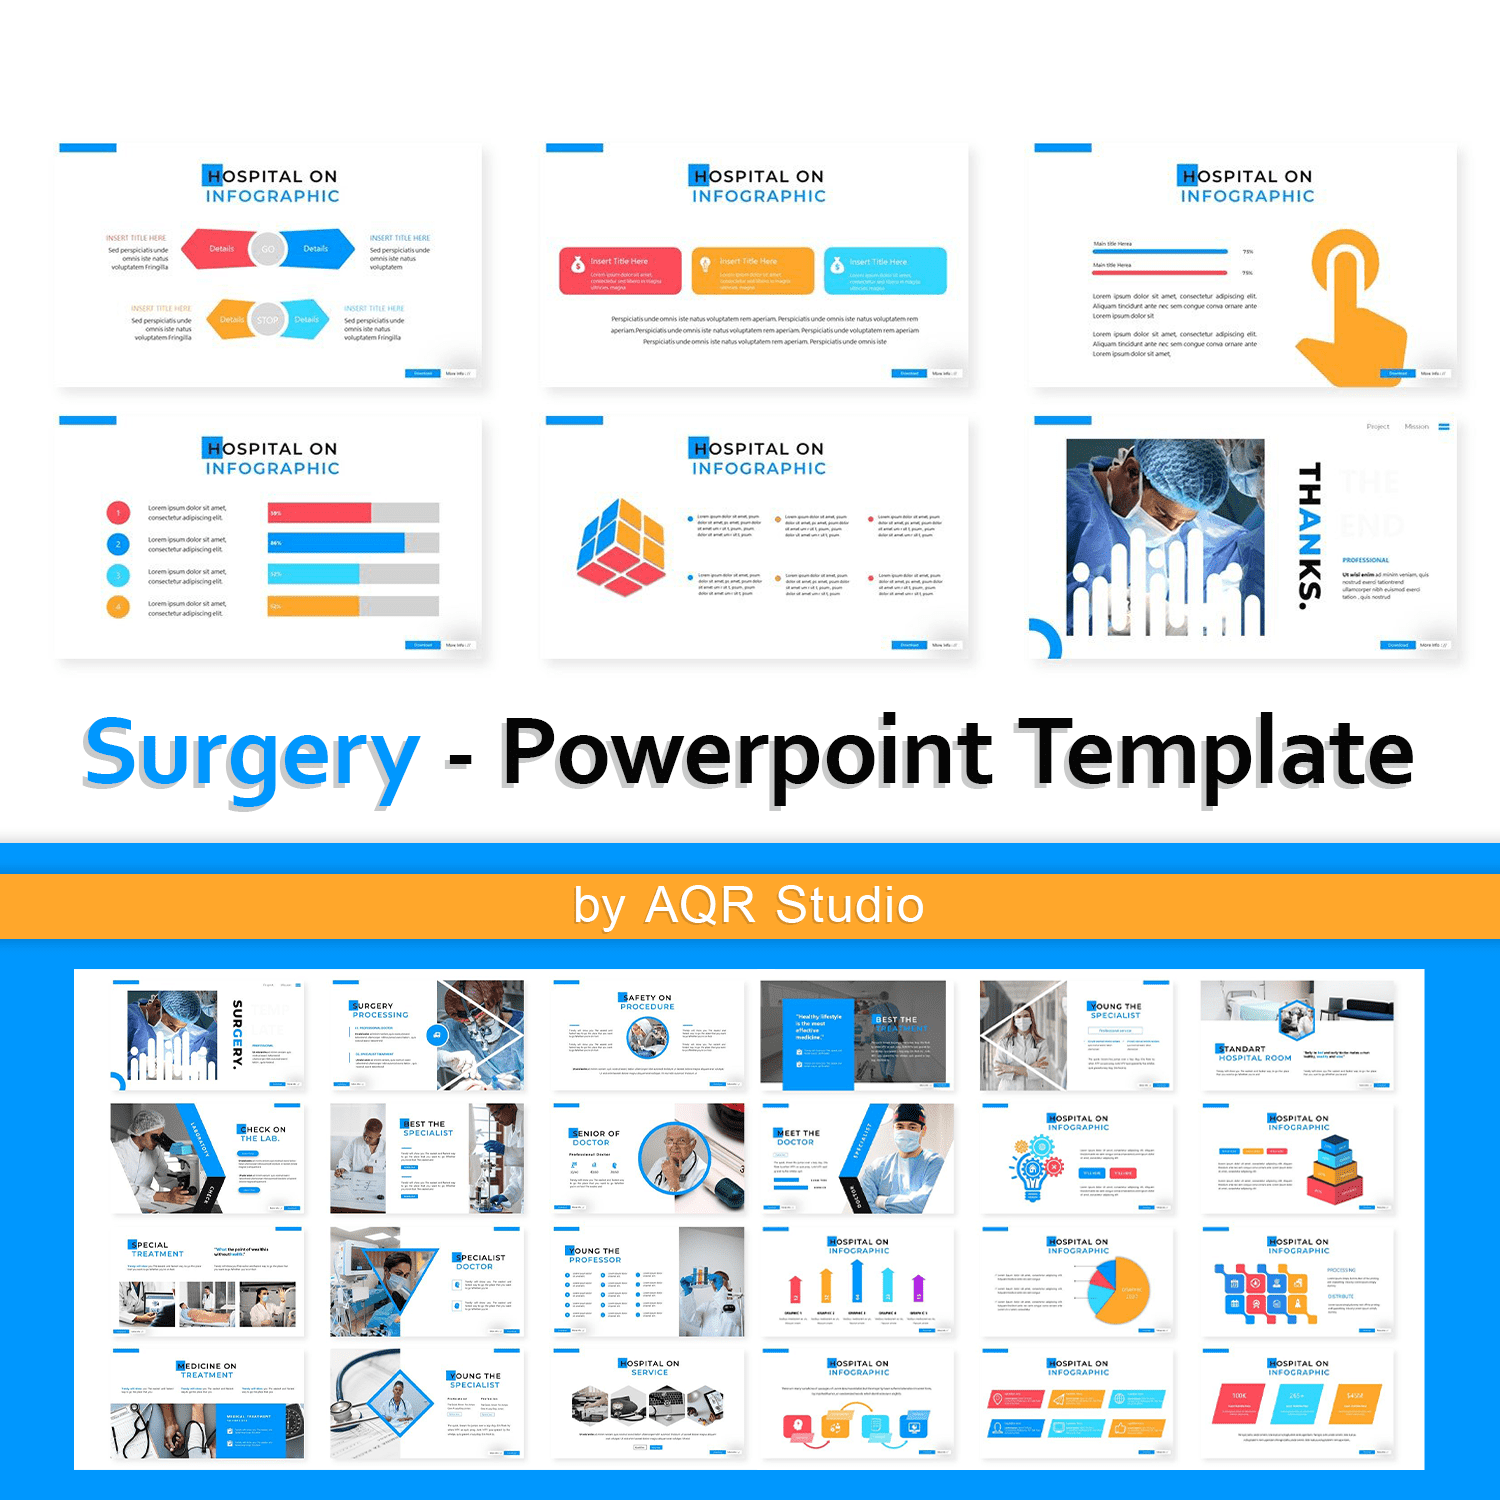 Surgery - Powerpoint Template.